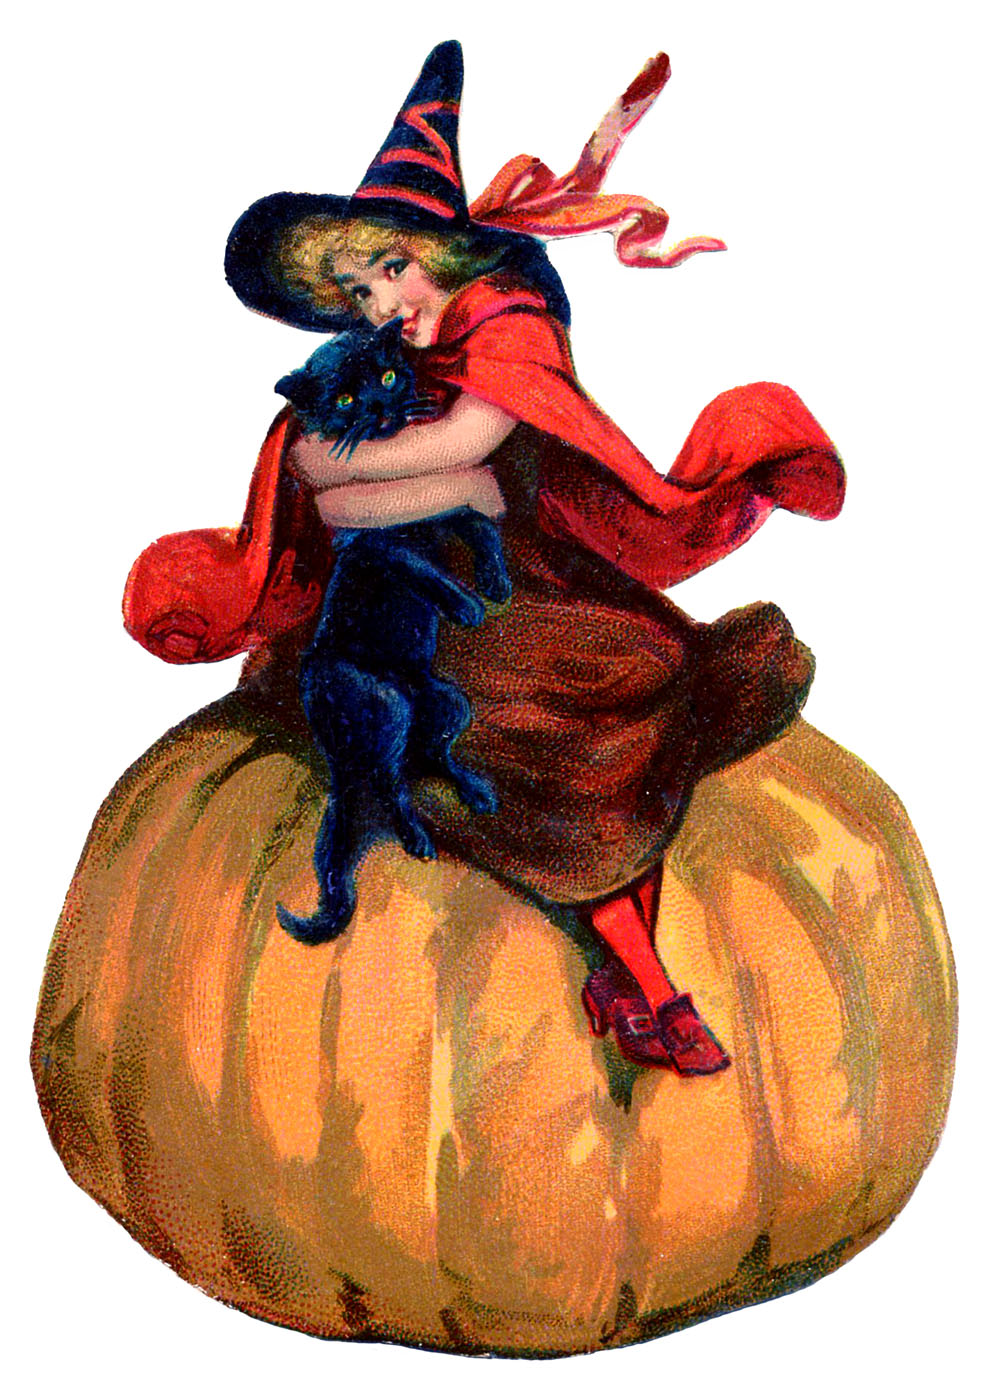 Halloween Clip Art Archives - Page 8 of 11 - The Graphics Fairy